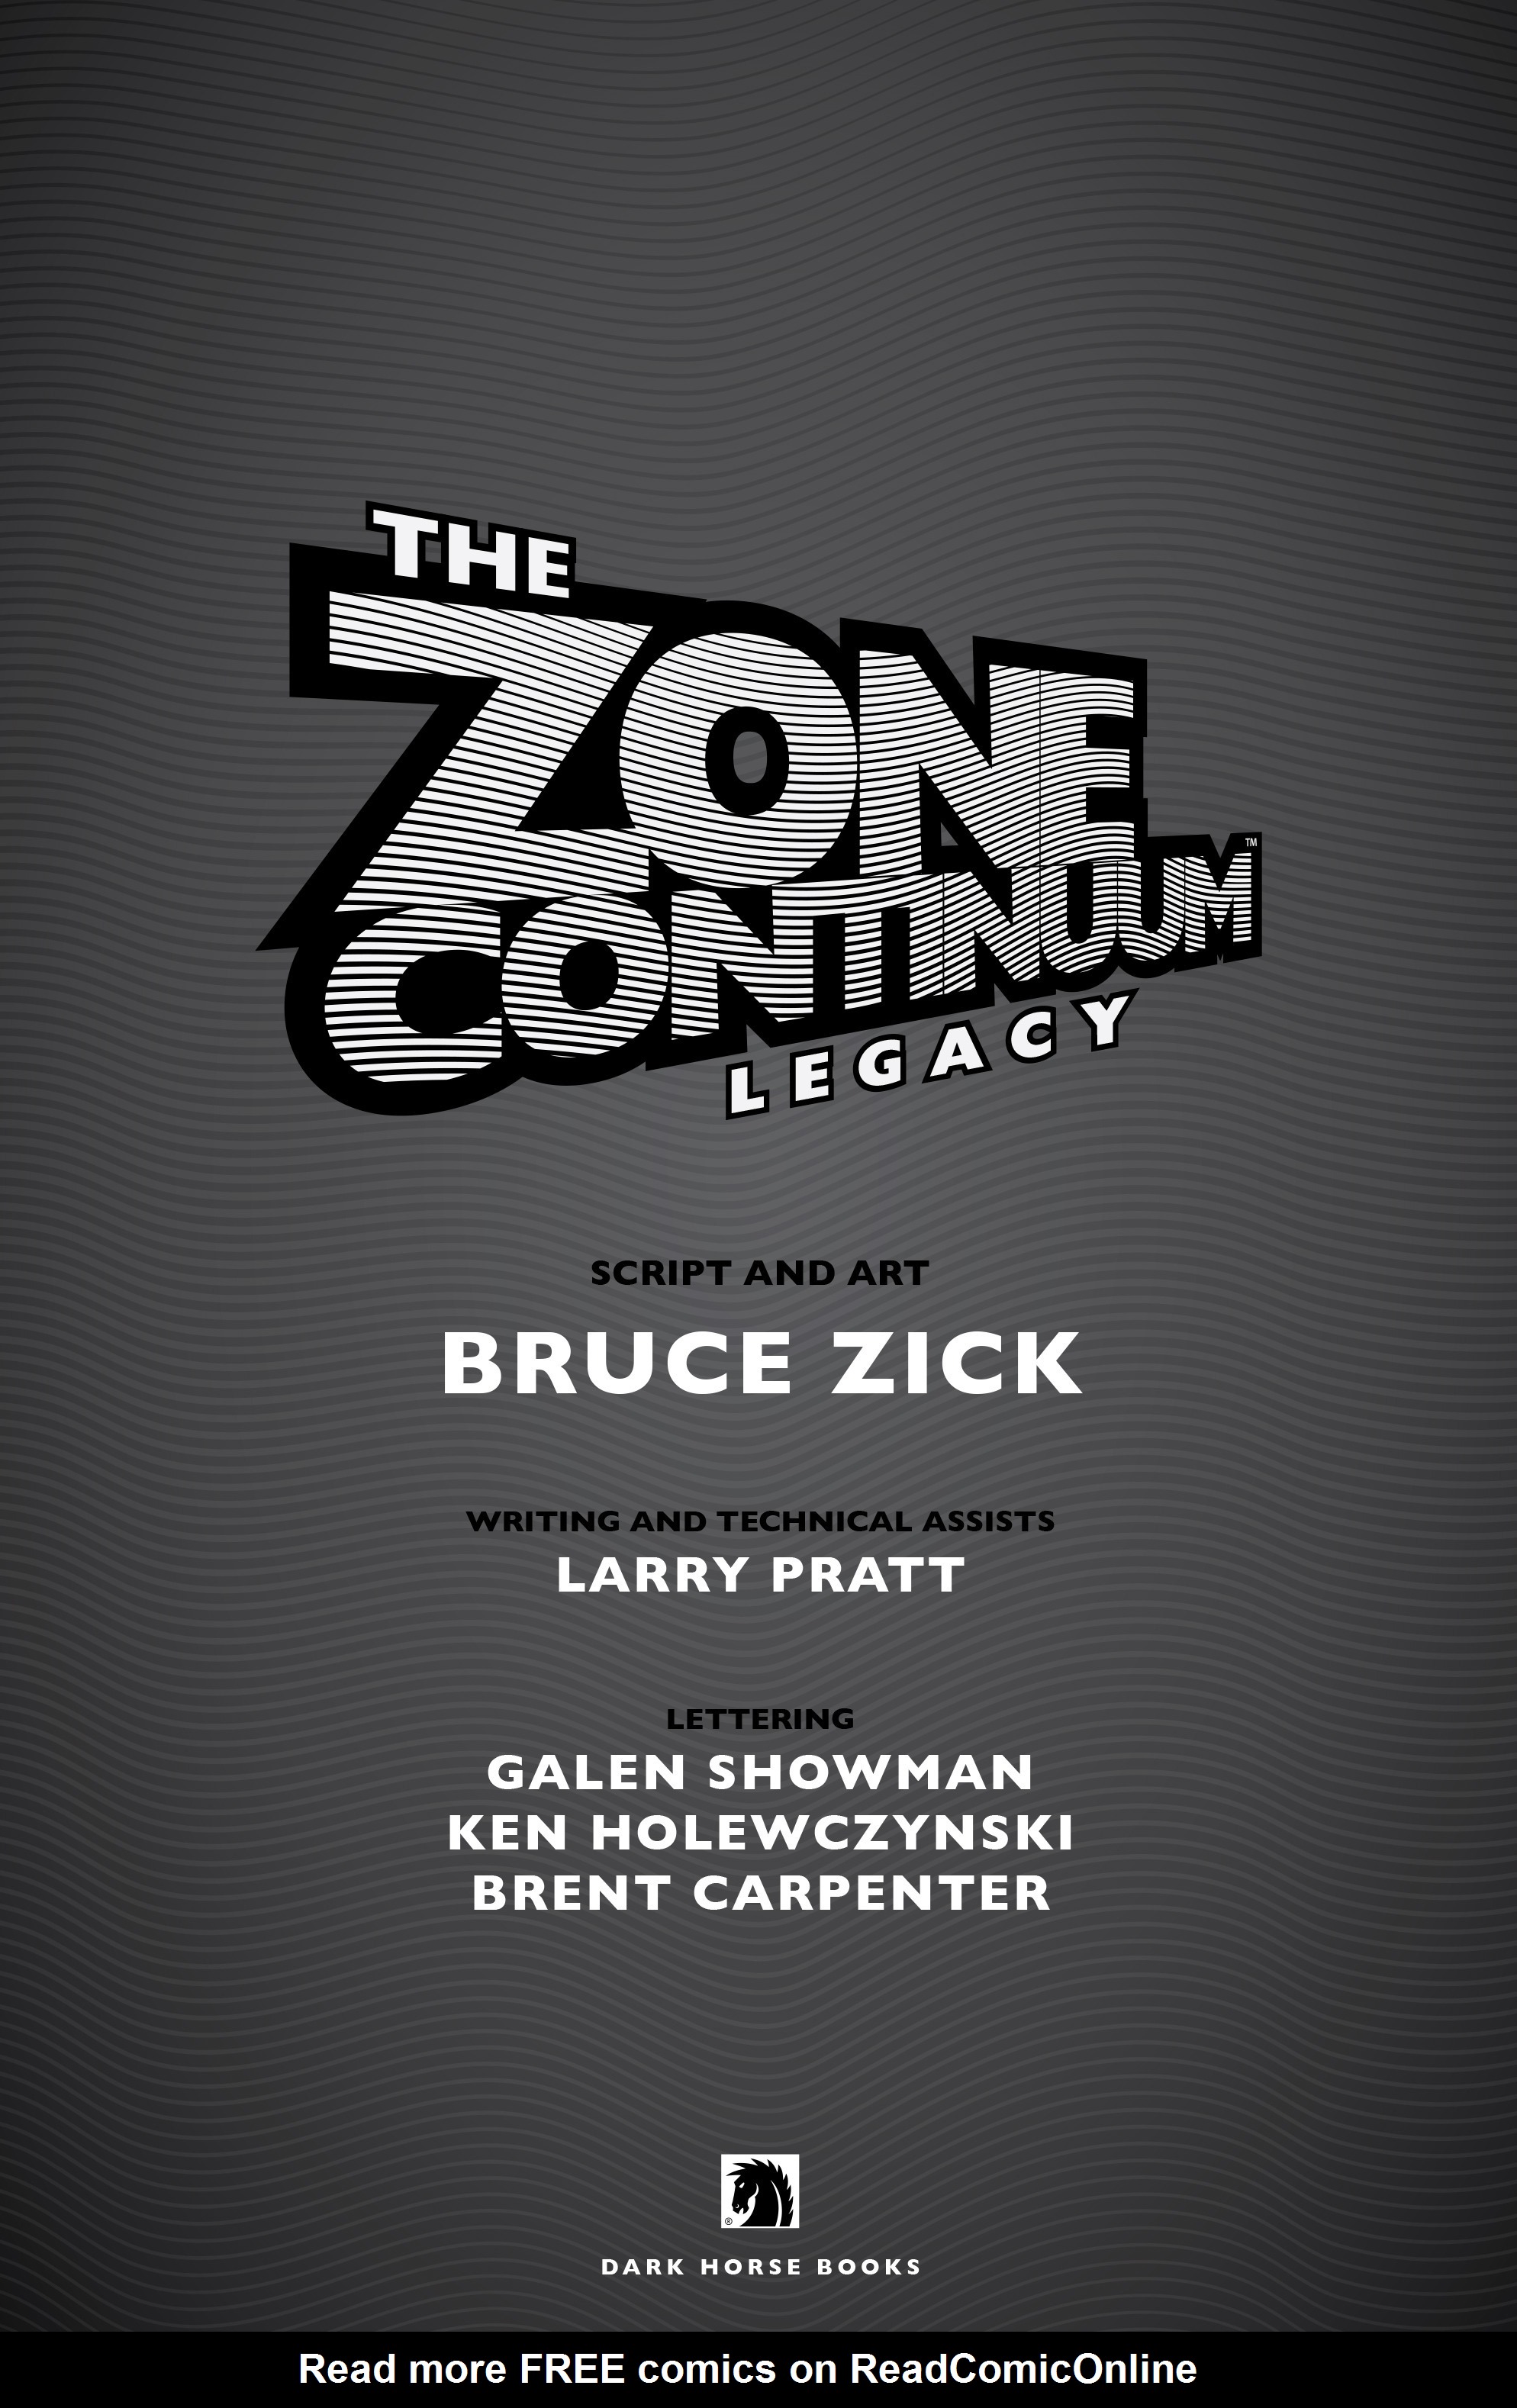 Read online The Zone Continuum: Legacy comic -  Issue # TPB - 5